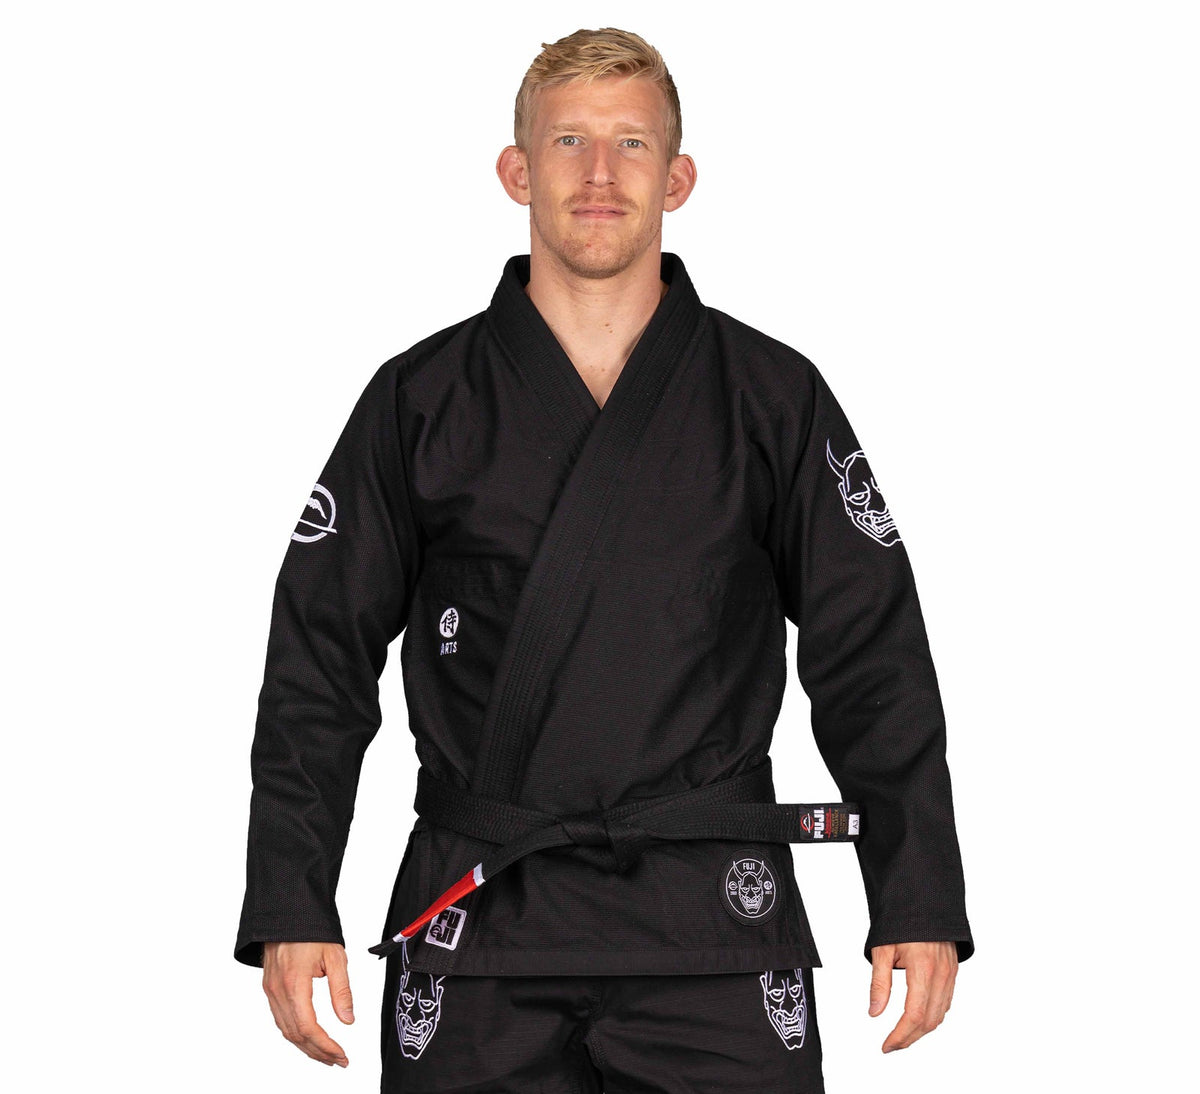 FUJI Tokai Nippon Judogi Uniform  100 Cotton Mixed Martial Arts Judo GI  Suits Includes Jacket and Pants  Suitable for Training Competitions and  SelfDefense White 1  Flyers Online